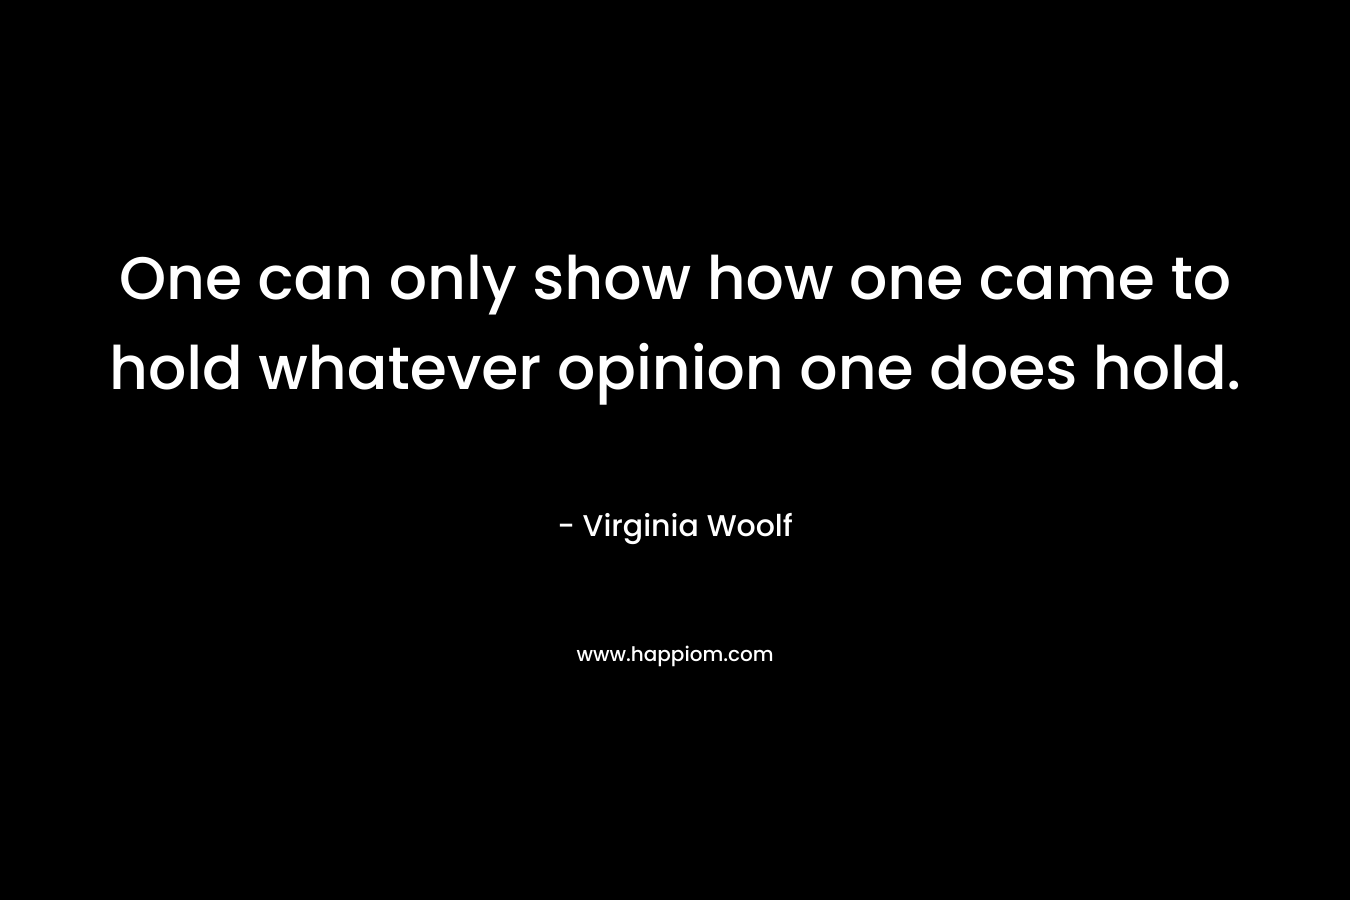 One can only show how one came to hold whatever opinion one does hold. – Virginia Woolf